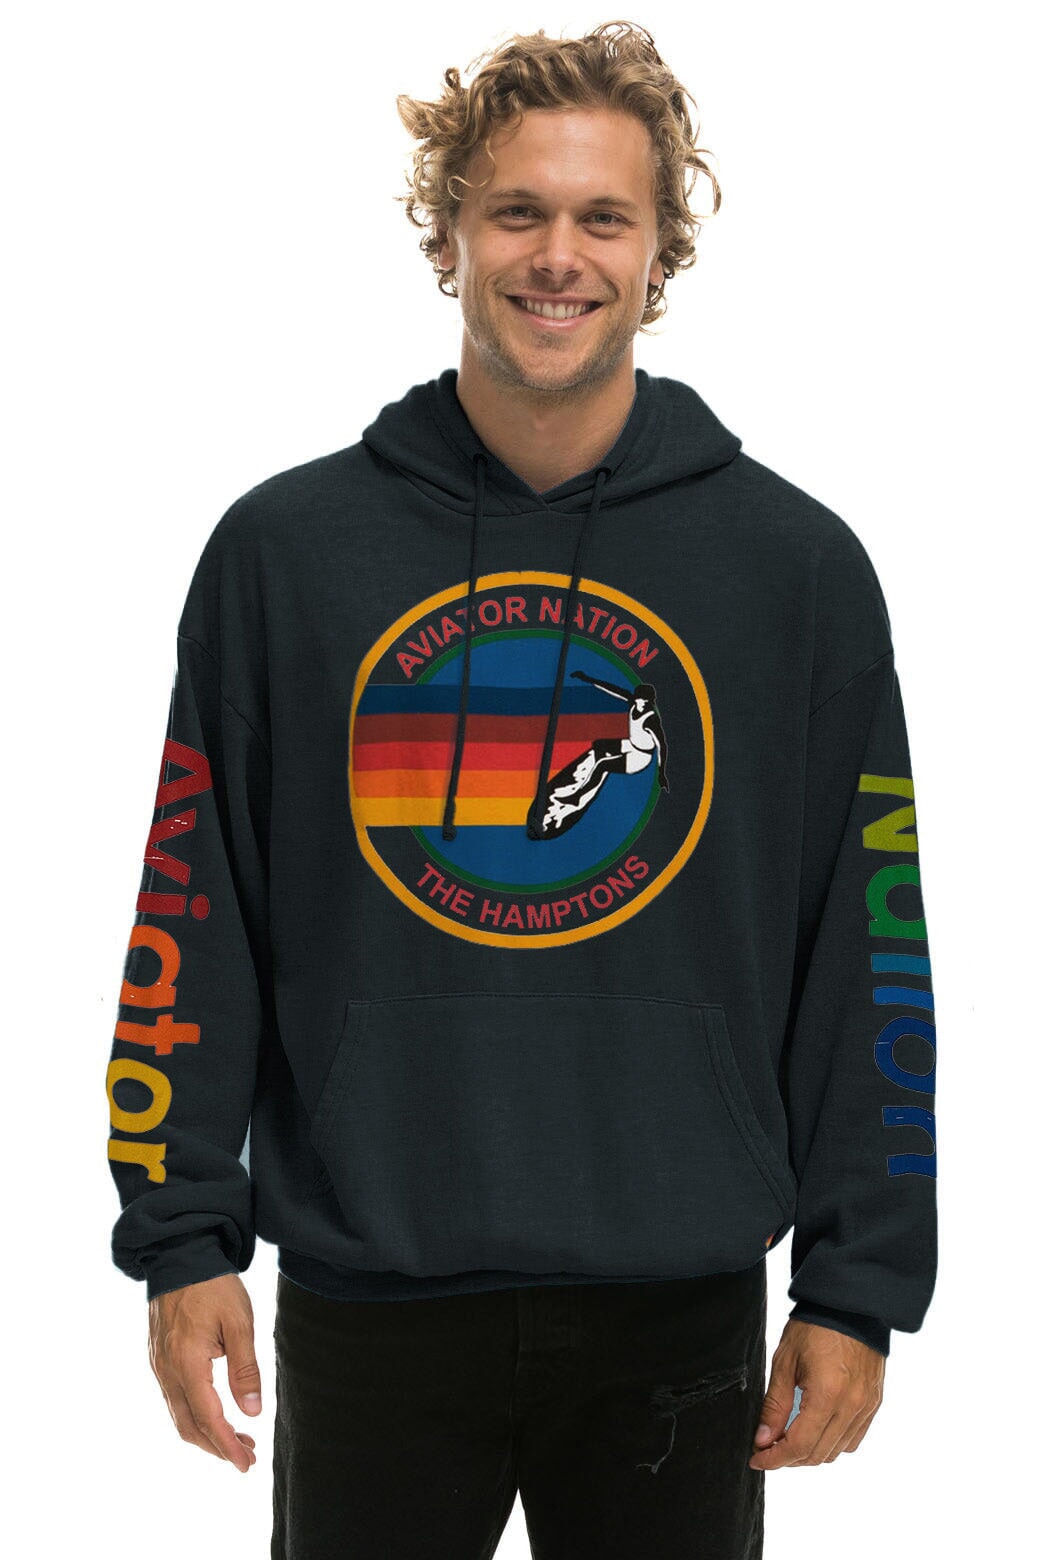 AVIATOR NATION HAMPTONS RELAXED PULLOVER HOODIE - CHARCOAL Hoodie Aviator Nation 